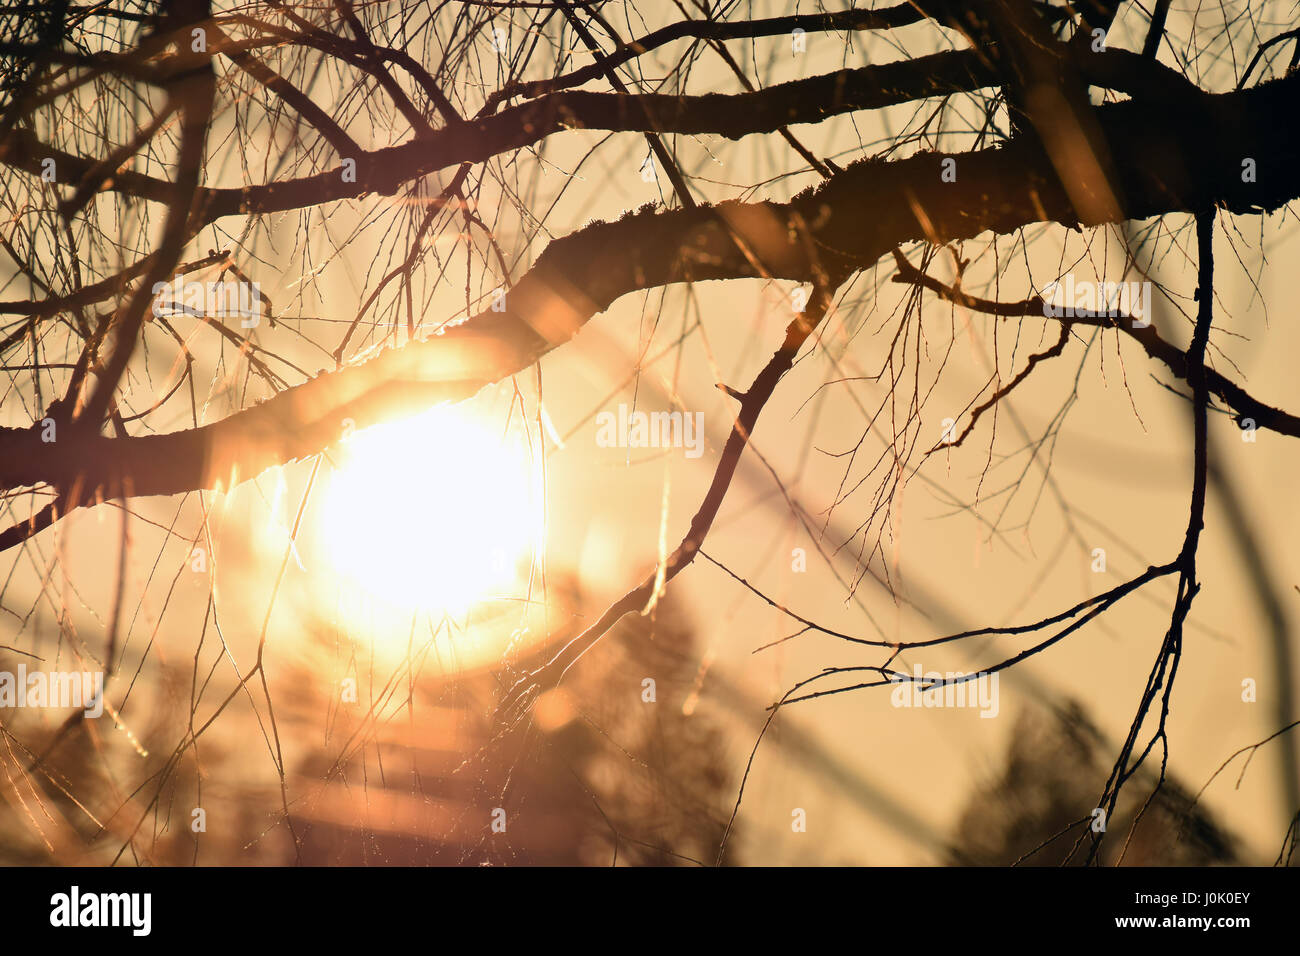 Tree branches in golden light. Sun on background. Stock Photo